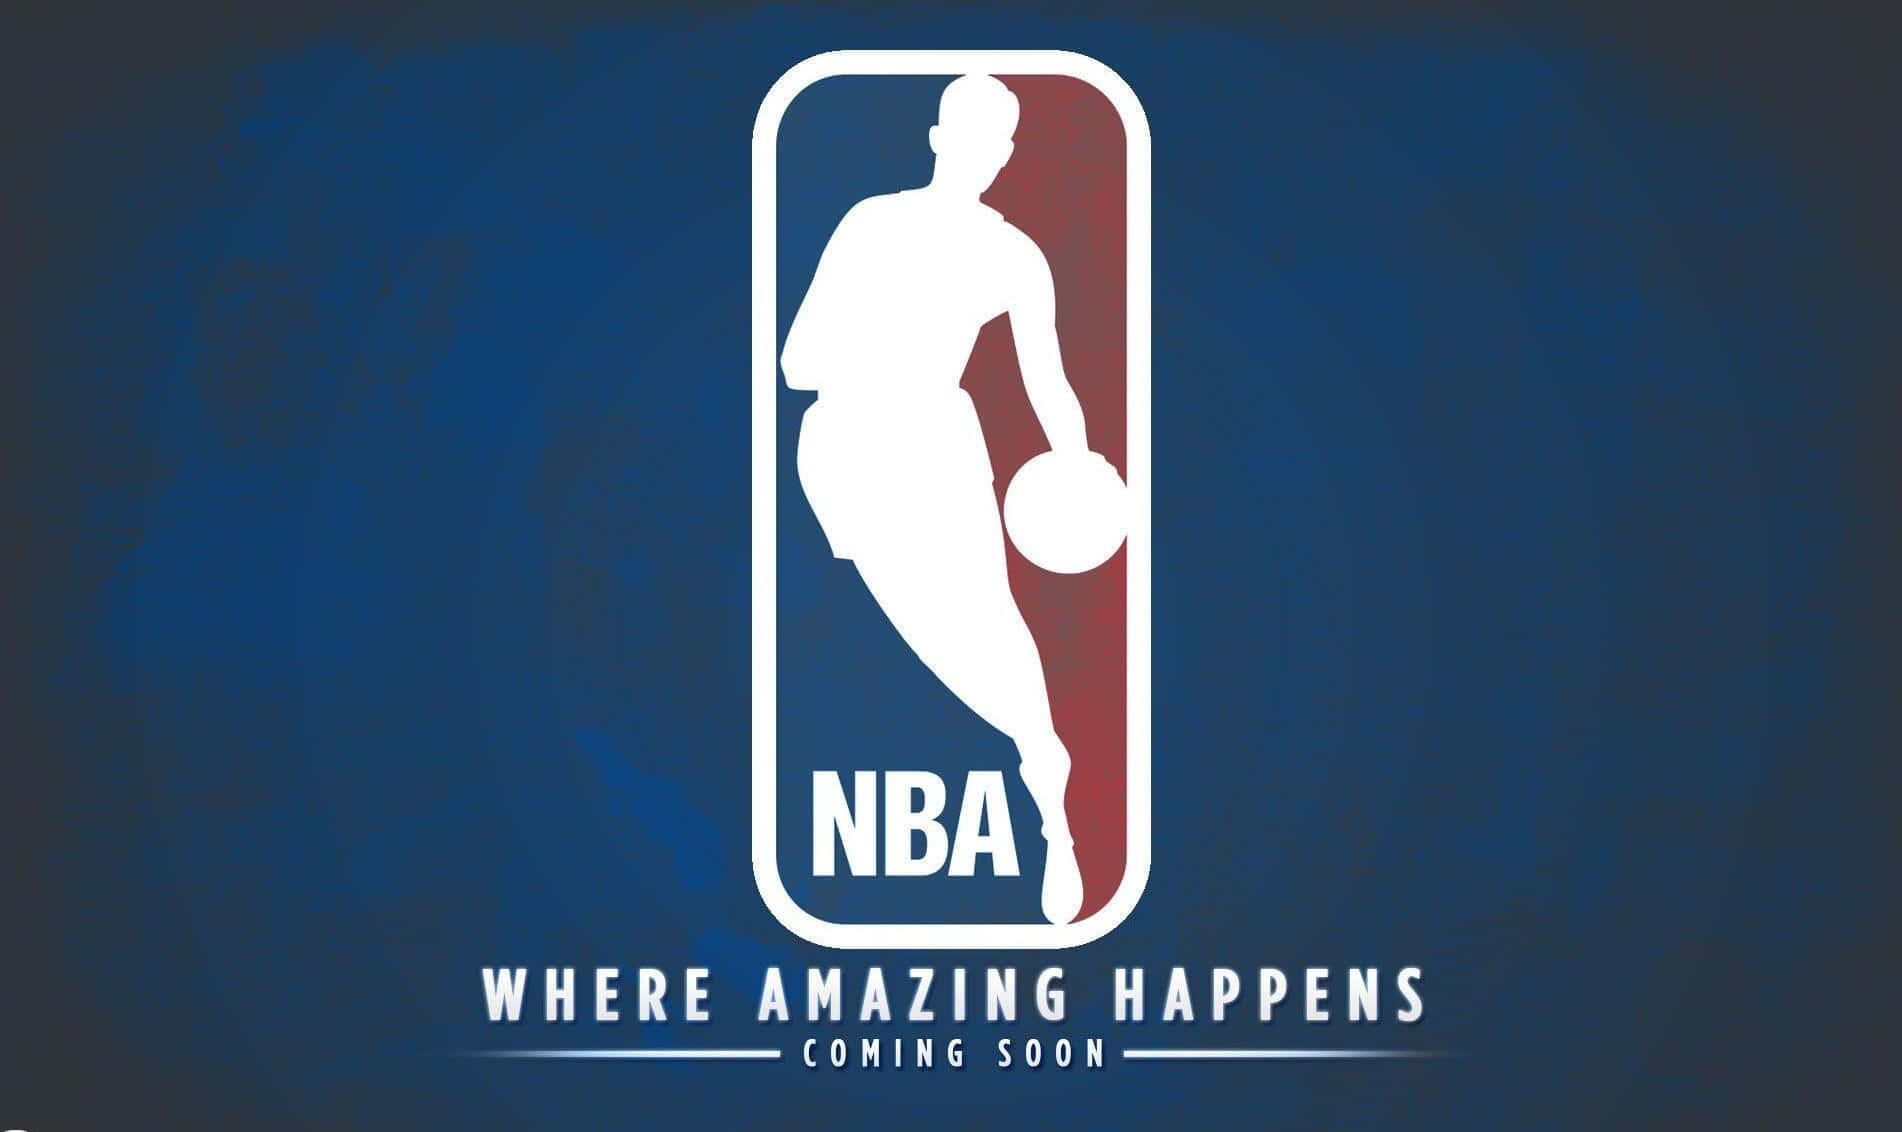 Leading the way in professional basketball - The NBA!